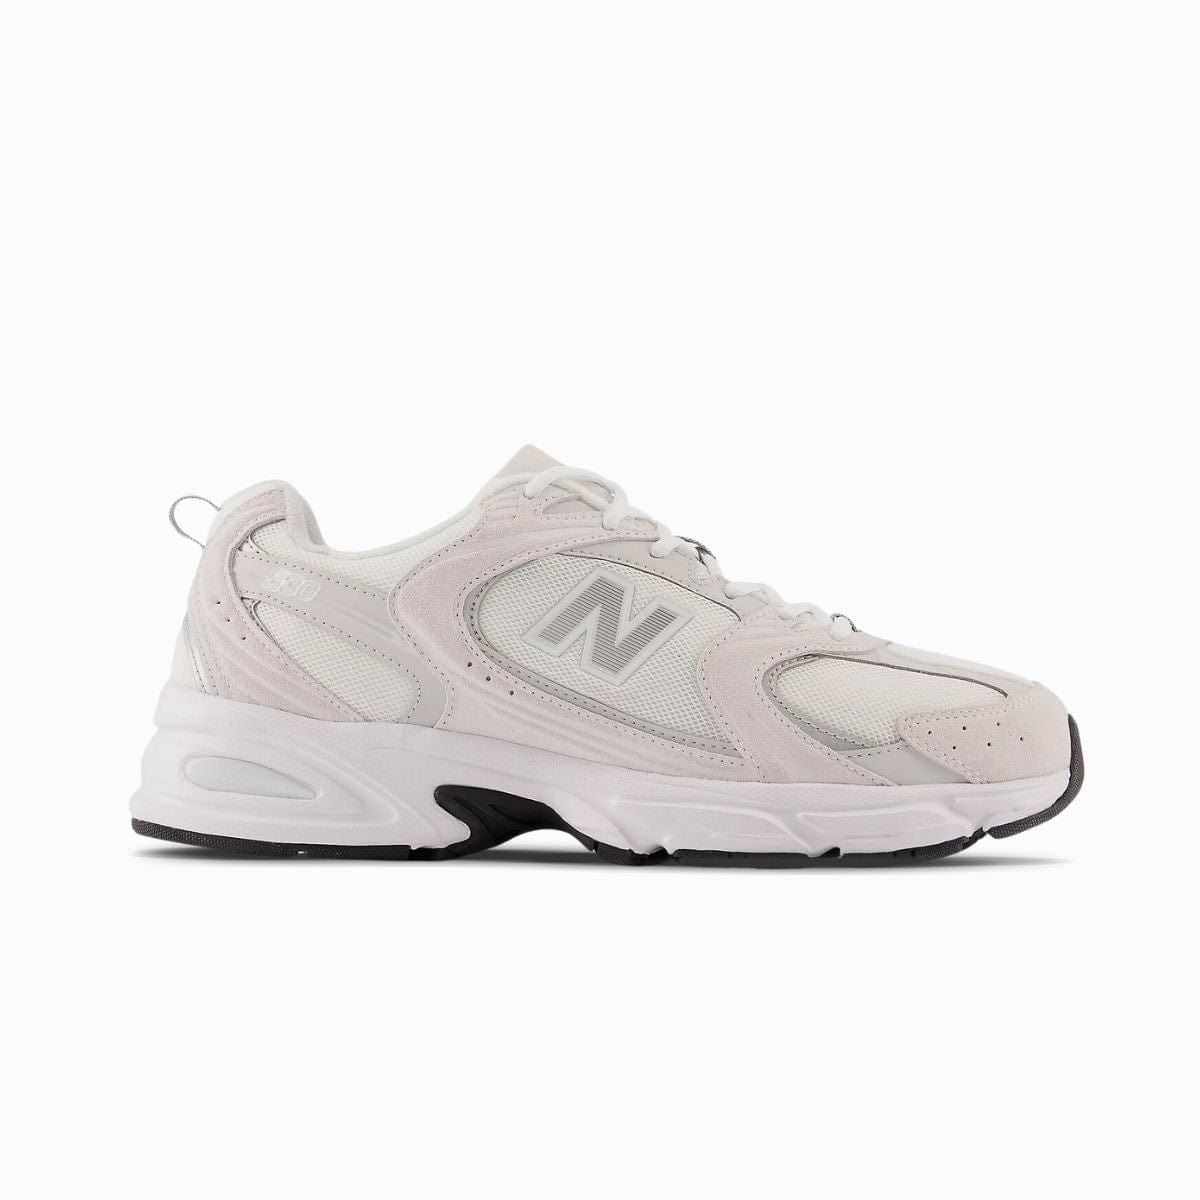 New Balance 530 Shoe Laces Replacement